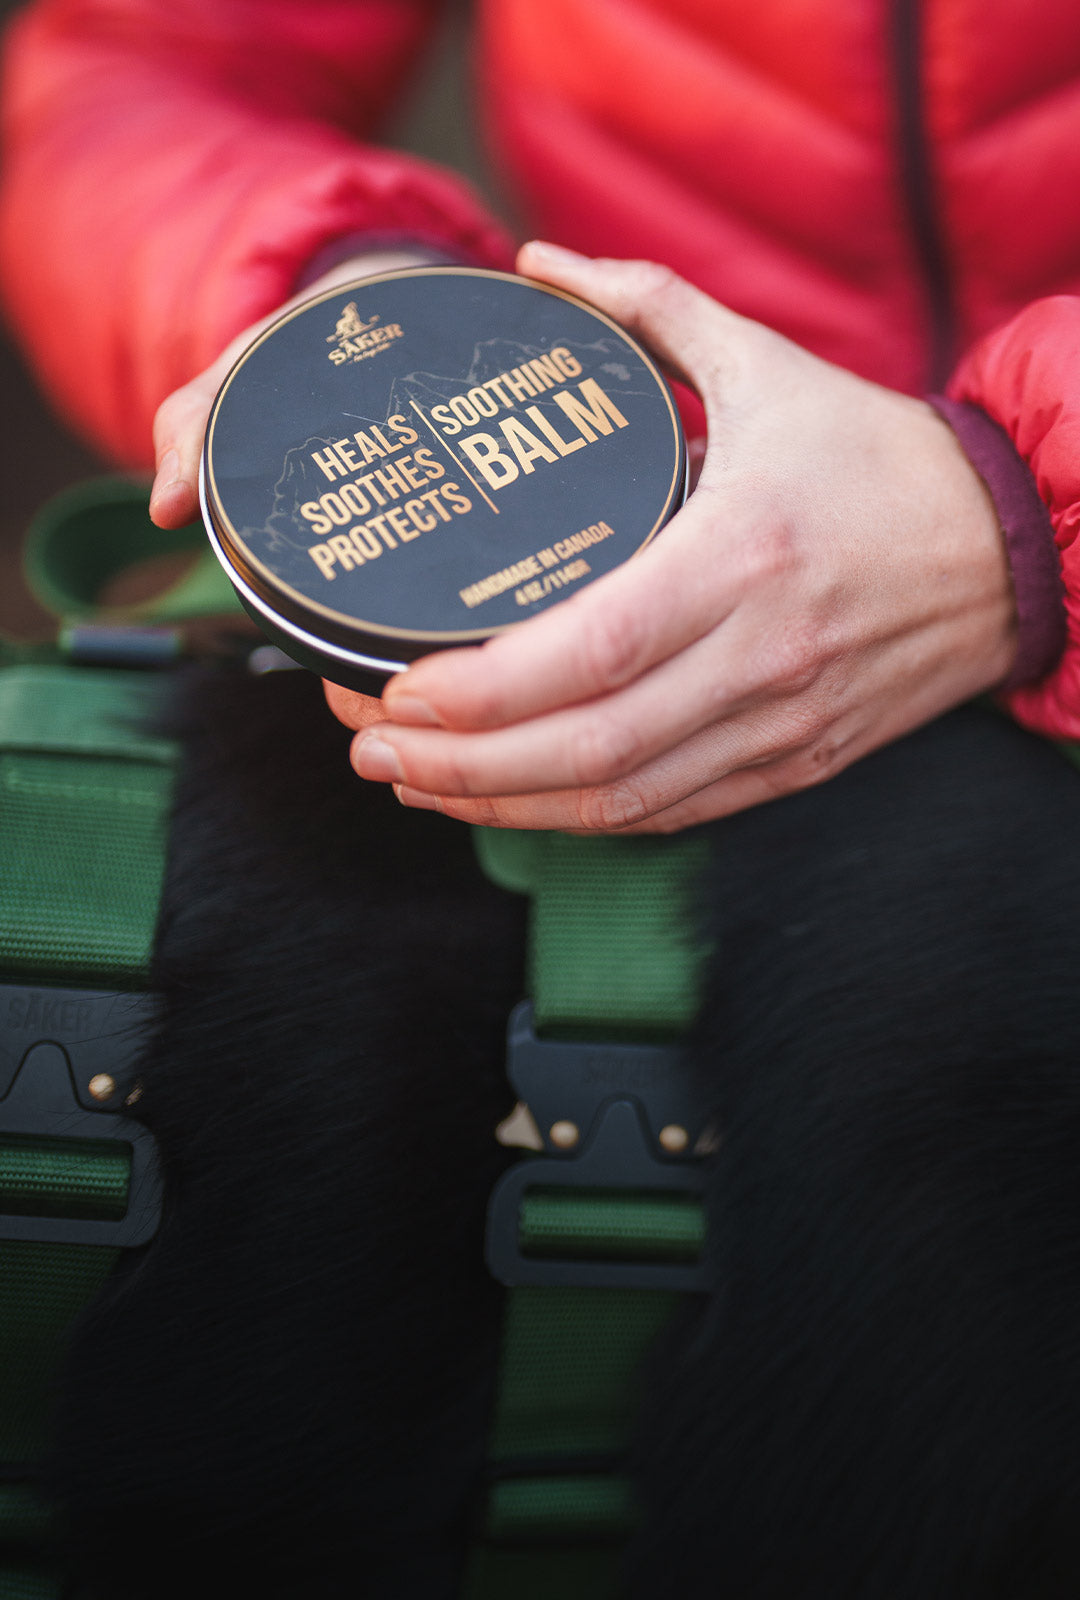 woman opening a tin can of soothing balm from saker before applying it to her dog paws